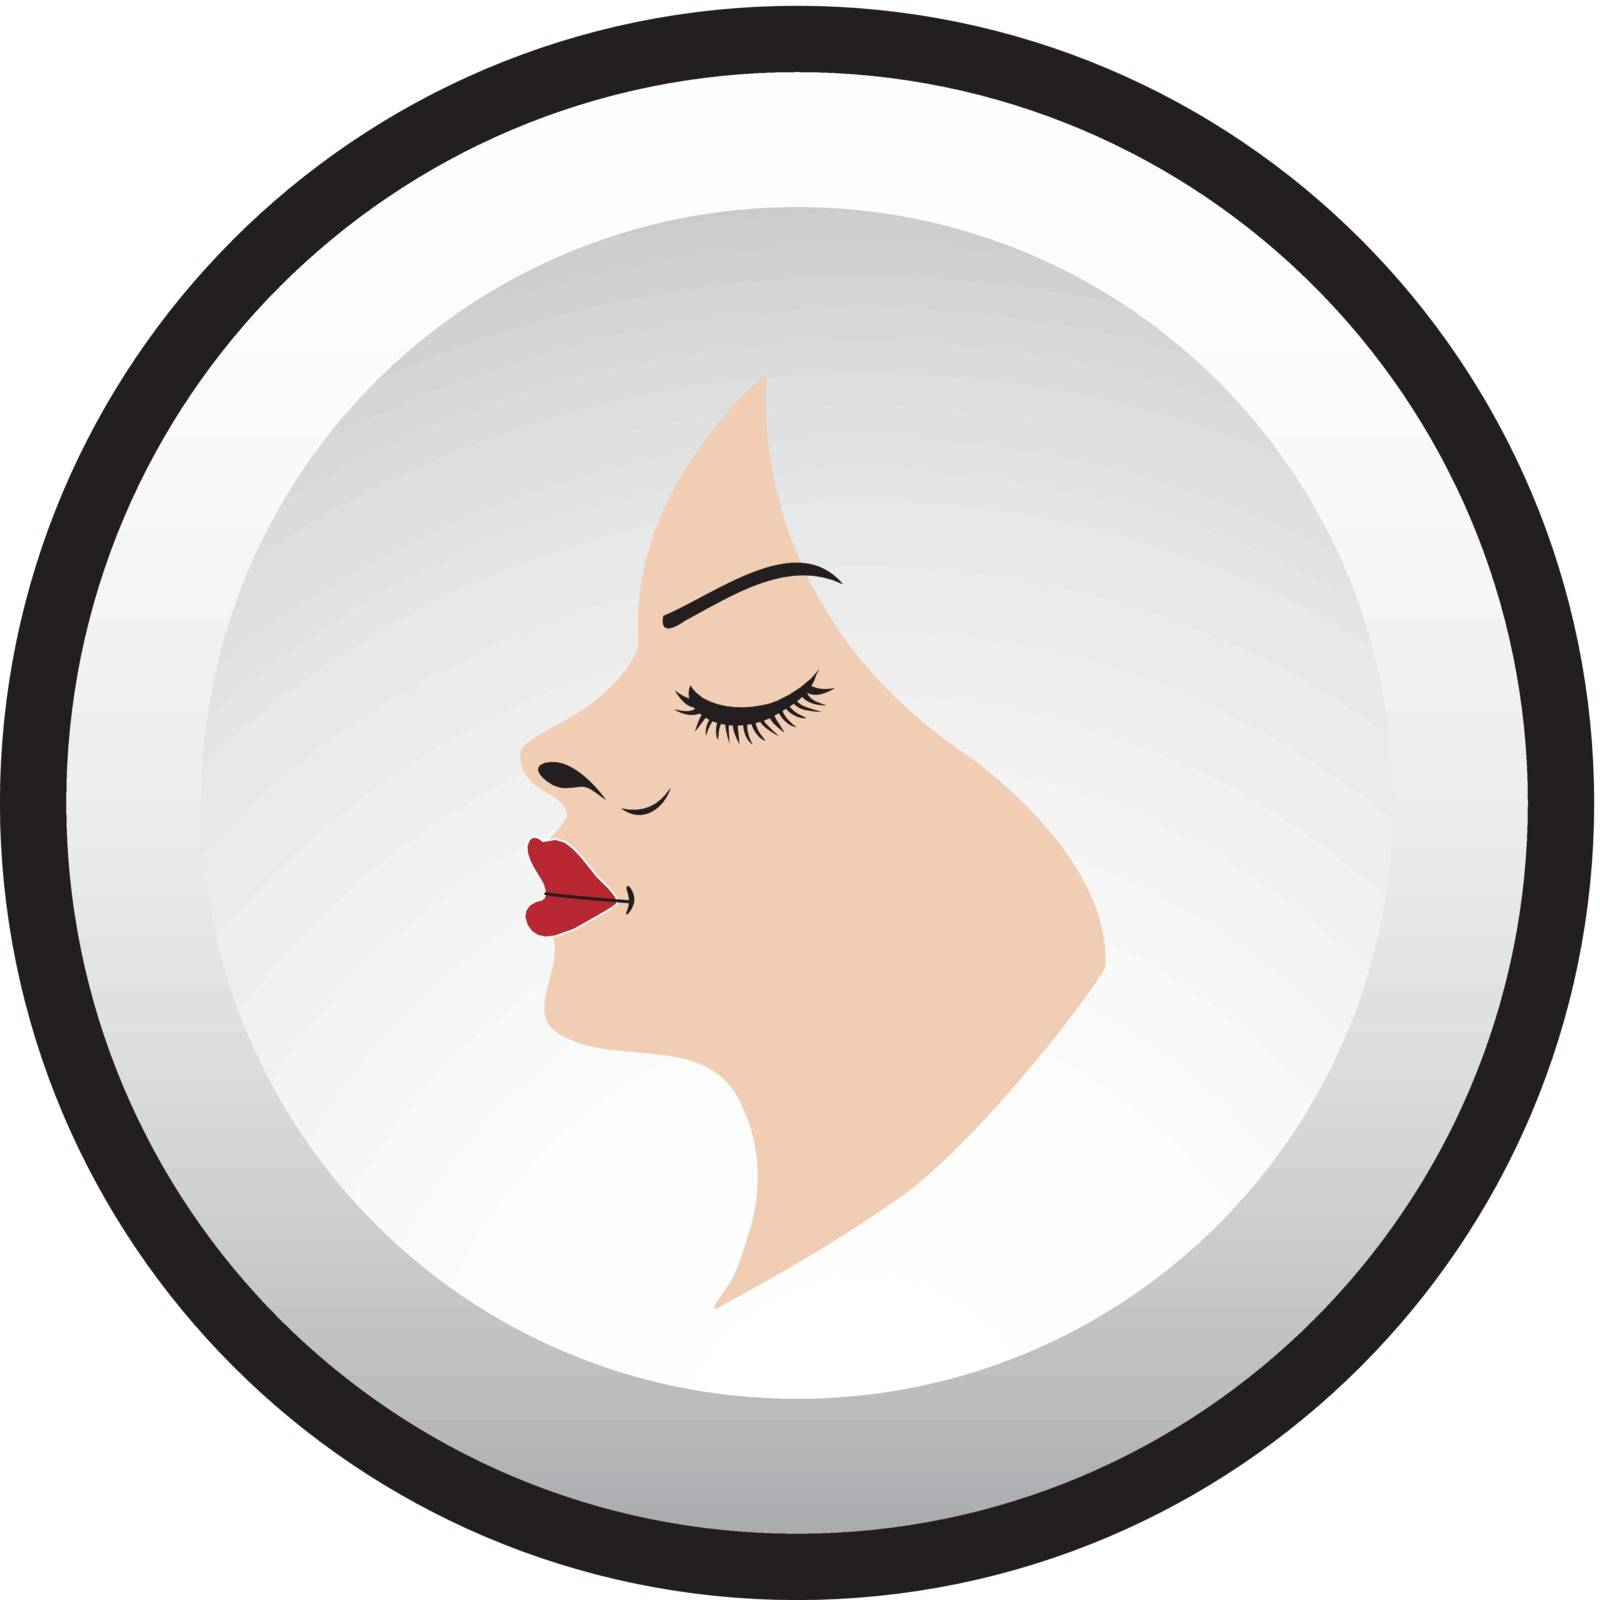 Logo for beauty salons